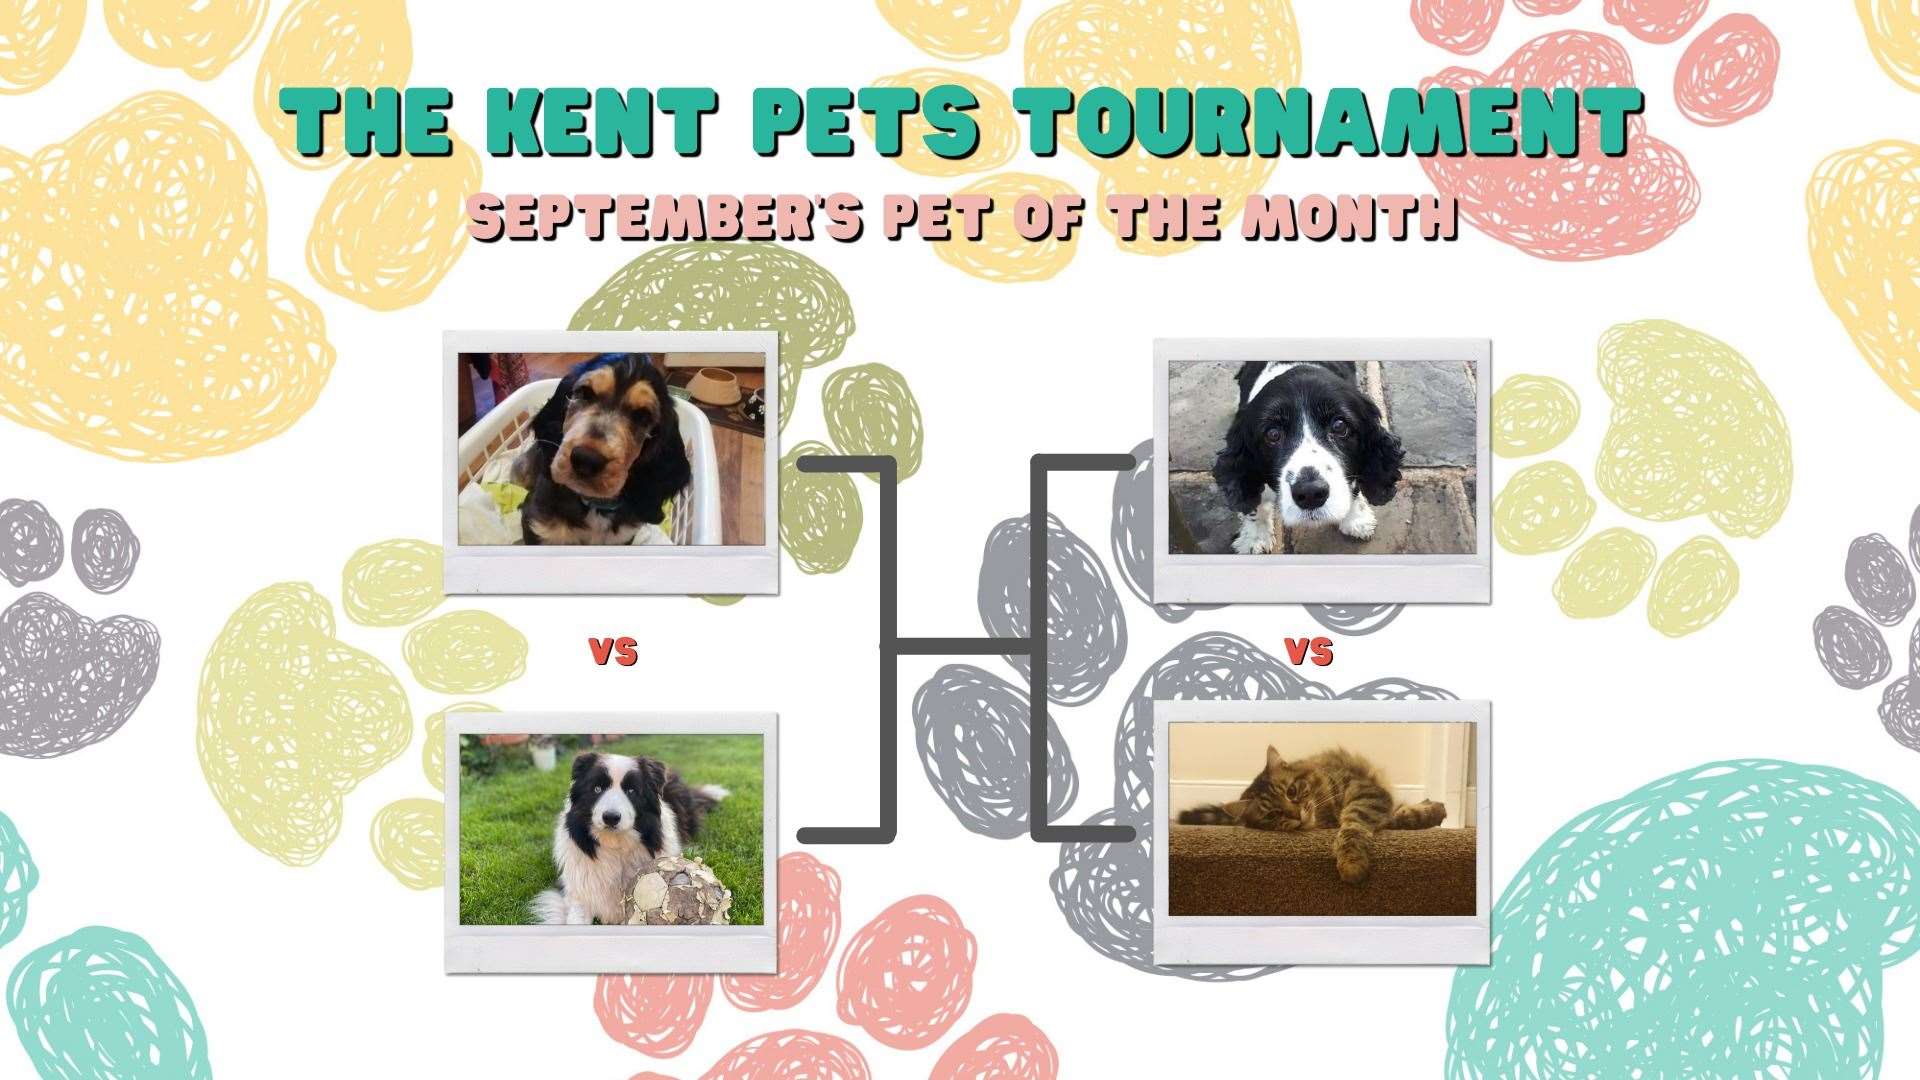 Vote for September's pet of the month